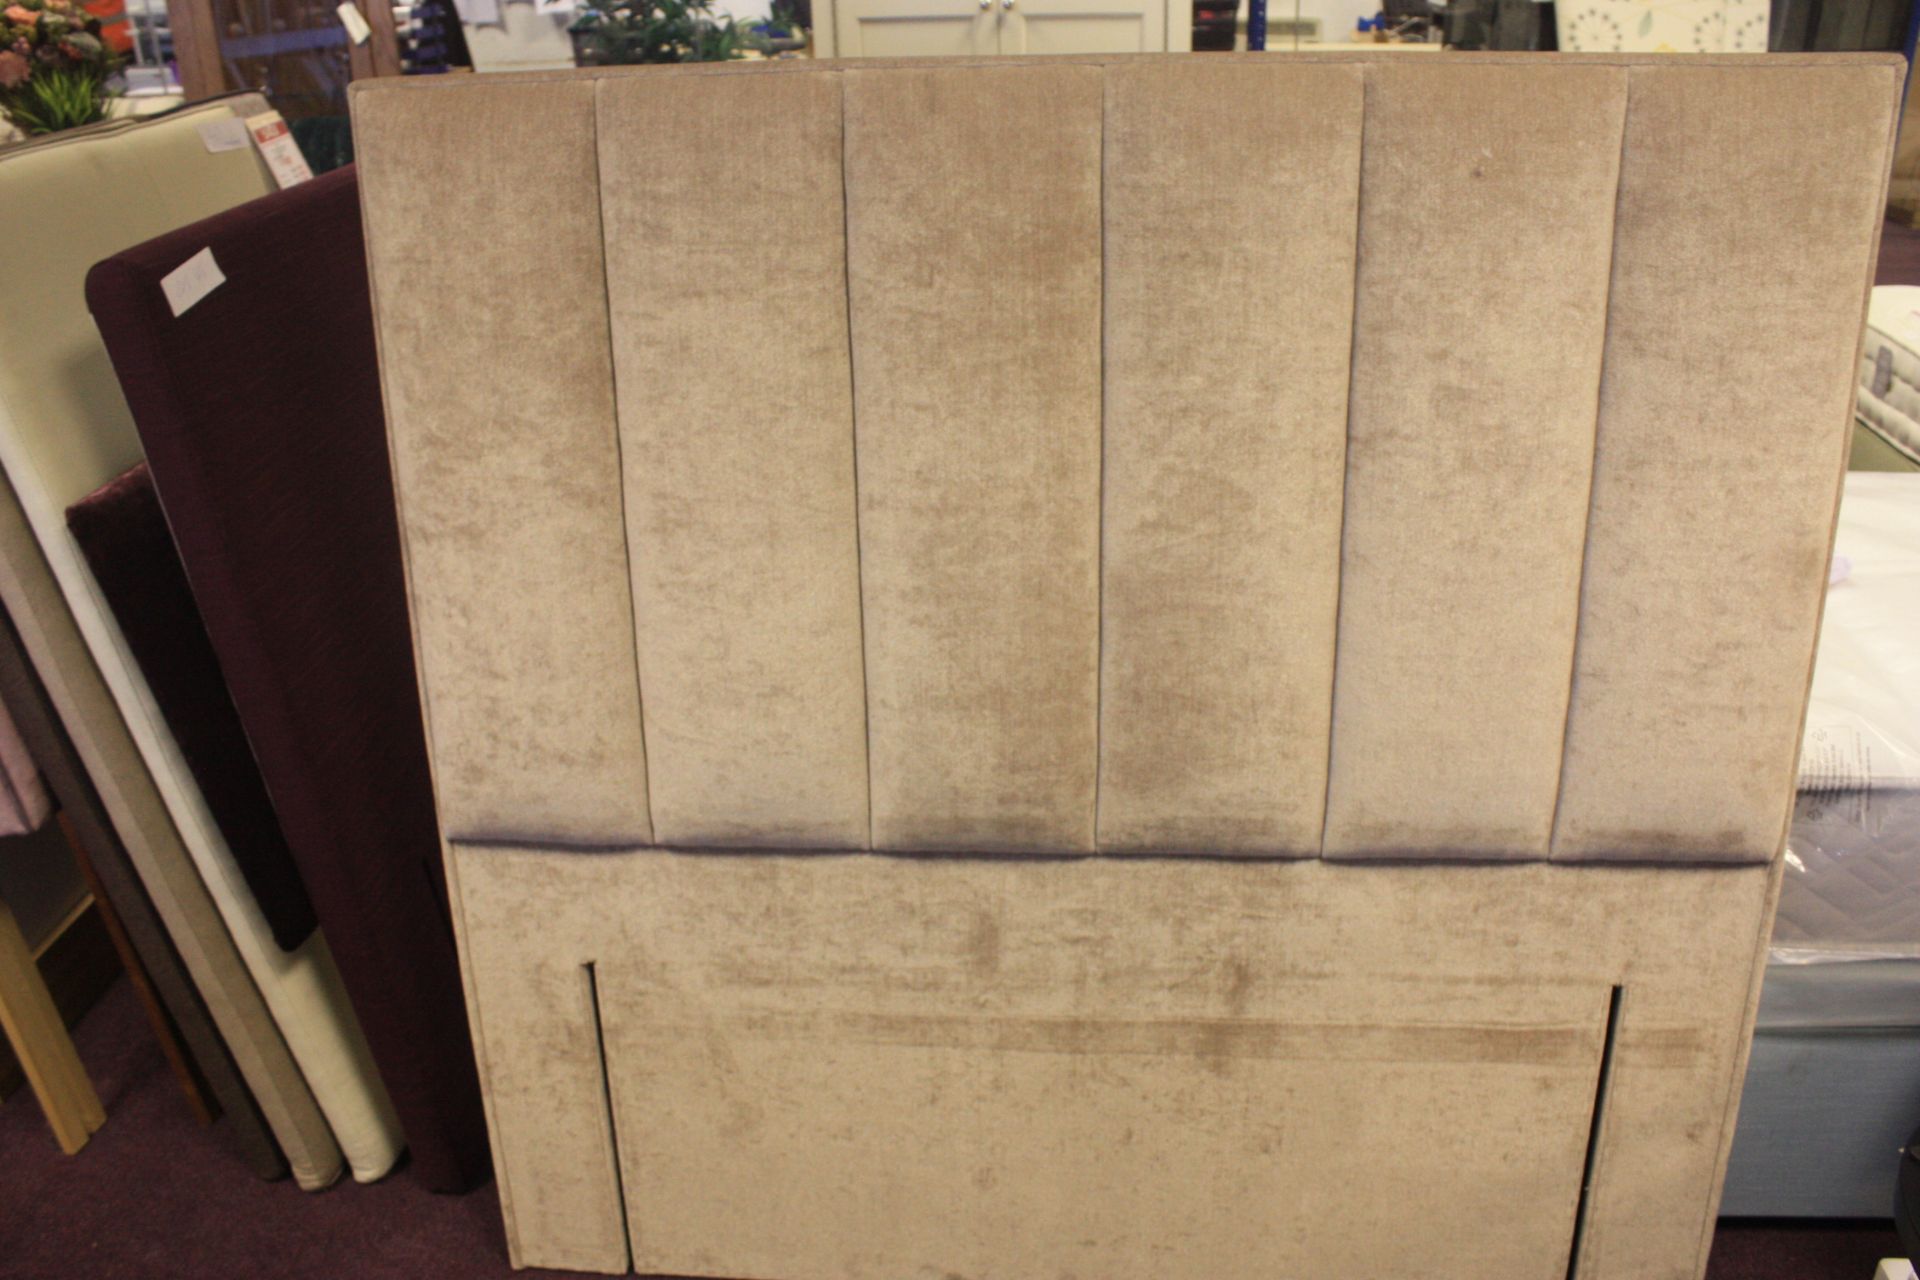 BEAUTIFUL 4FT 6IN FULLY PLEATED HEADBOARD IN A LIGHT MUSHROOM MATERIAL RRP £475